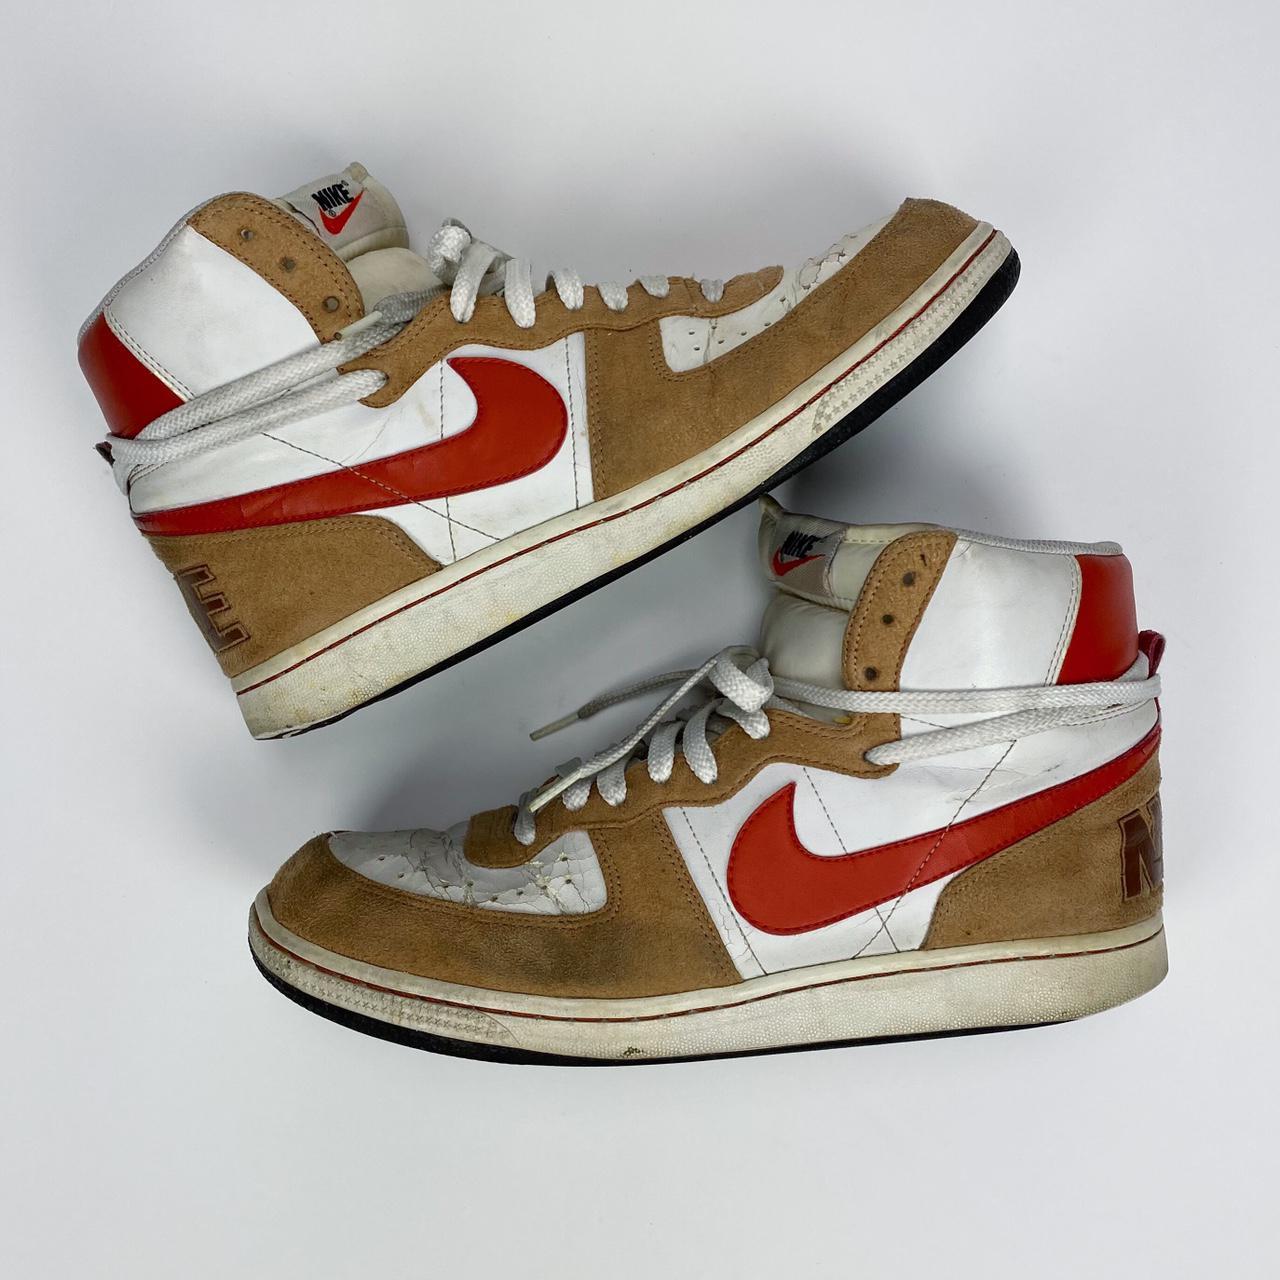 Nike Men's Tan and Red Trainers (4)